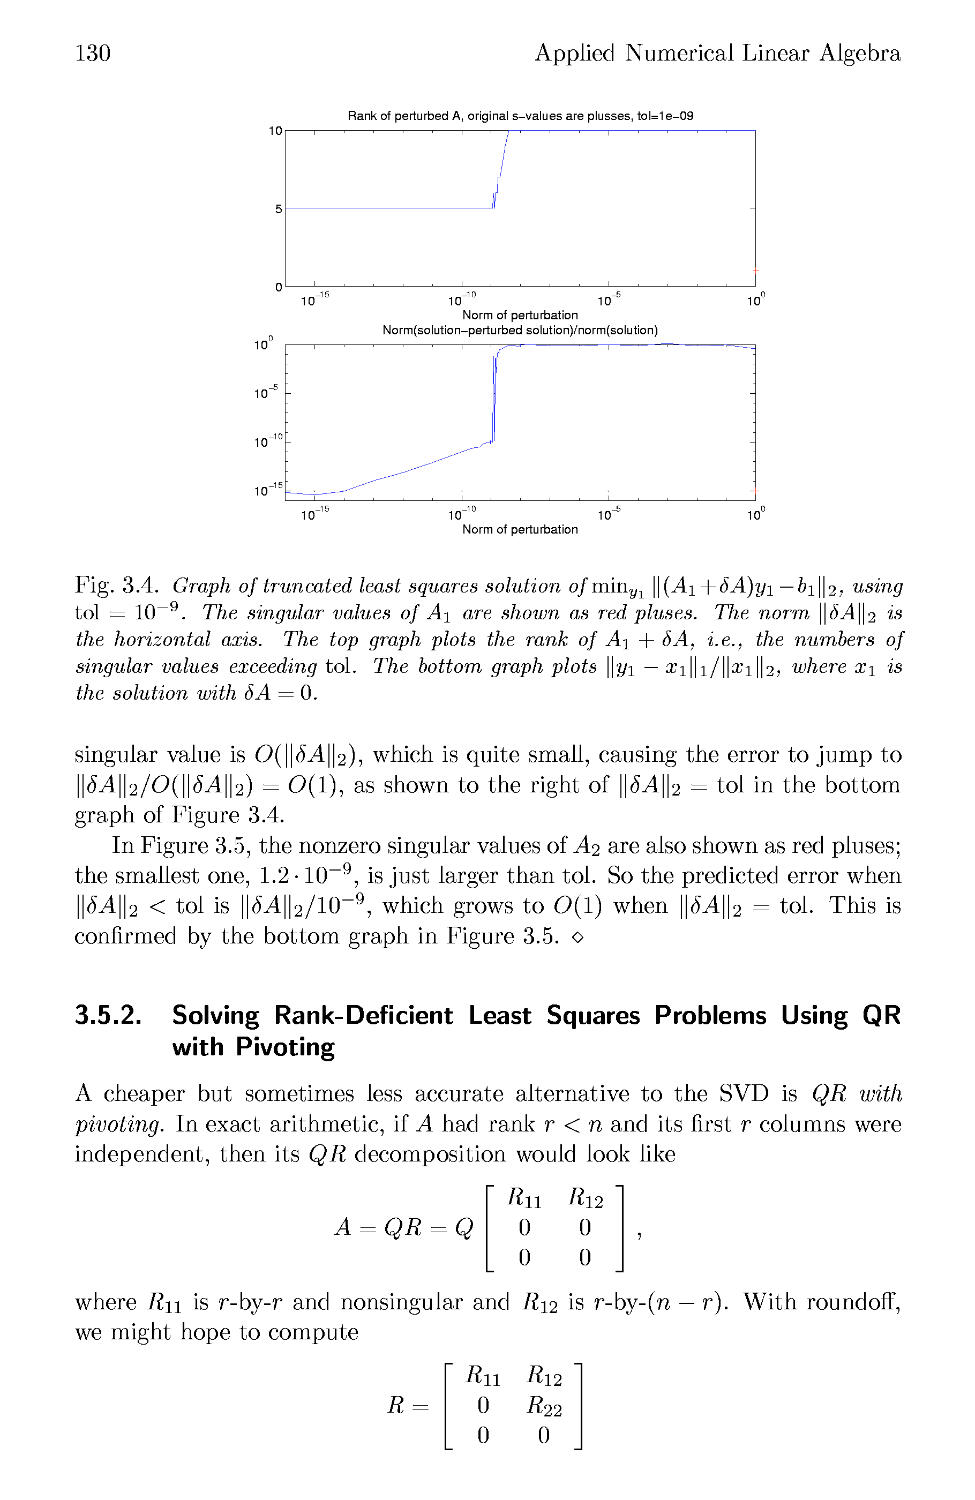 3.5.2 Solving Rank-Deficient Least Squares Problems Using QR with Pivoting